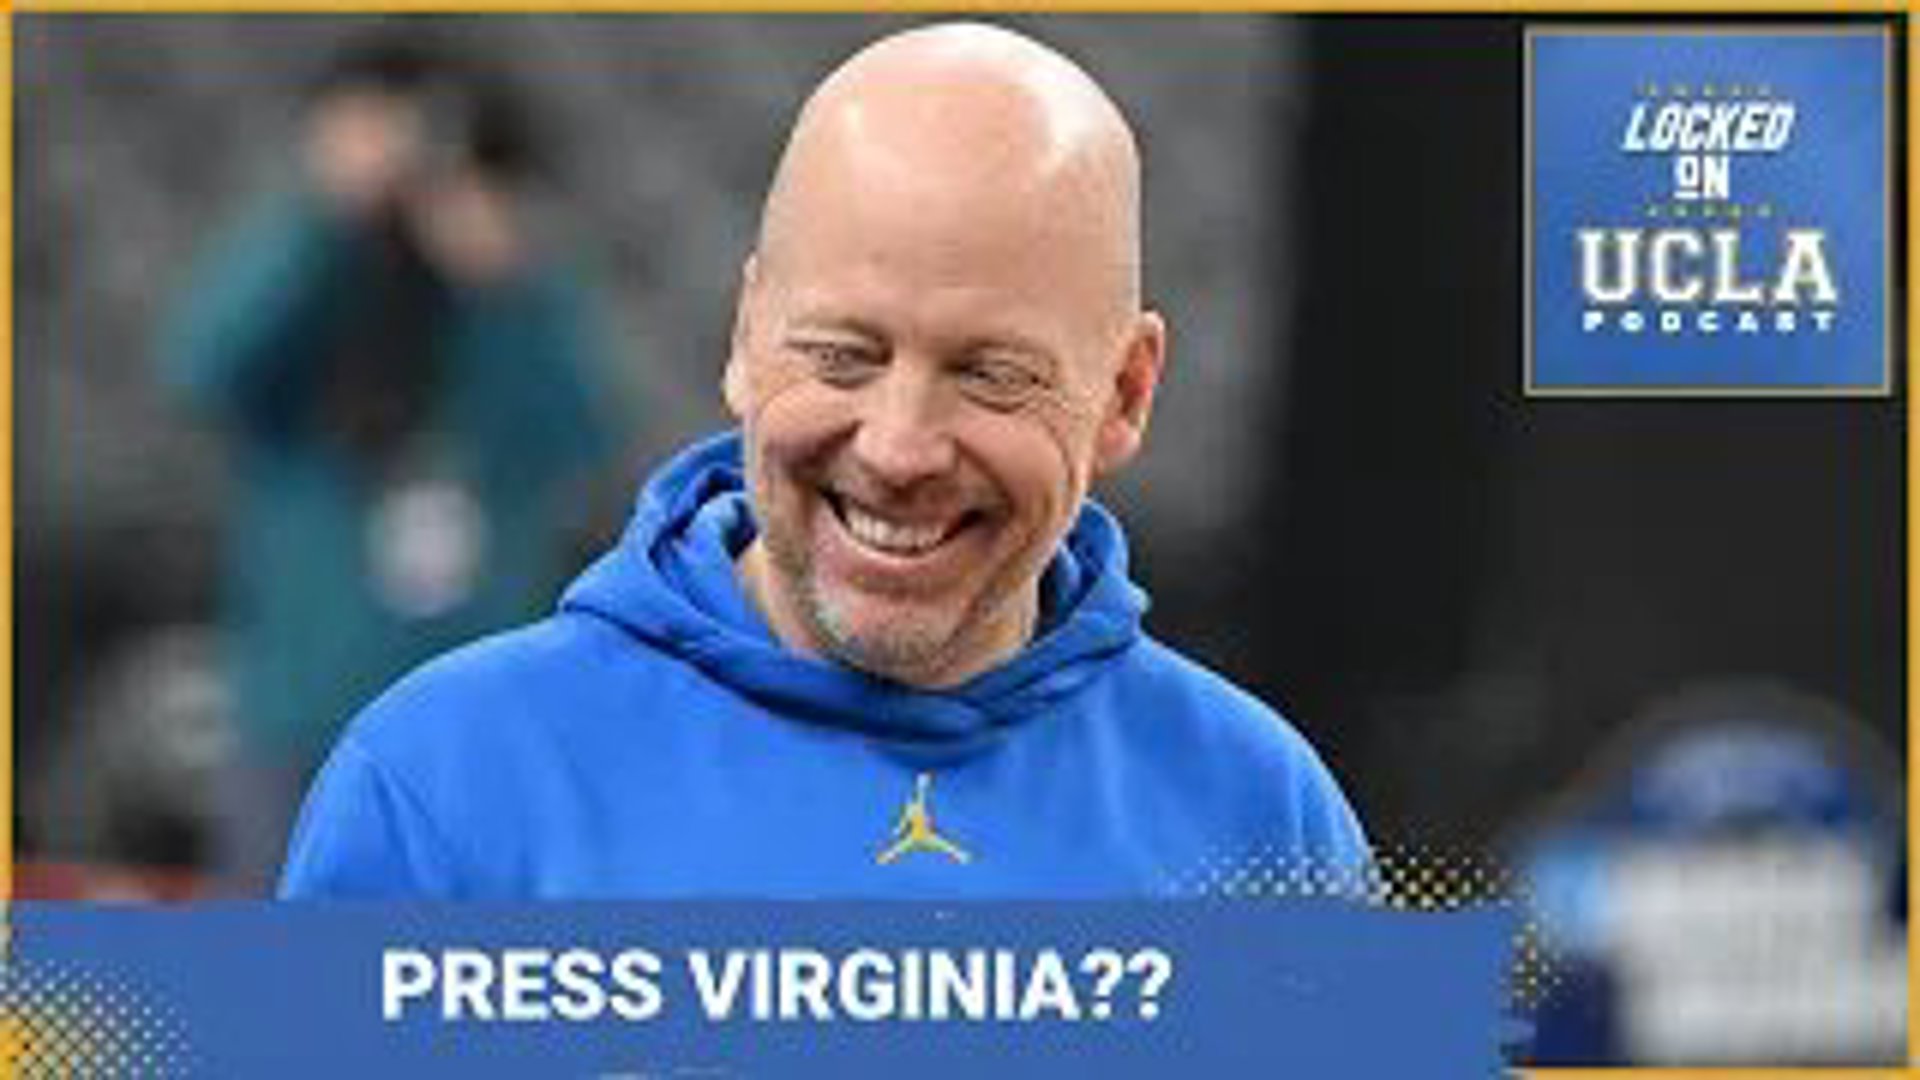 On this episode of Locked On UCLA, Zach Anderson-Yoxsimer discusses the potential for Mick Cronin to install full-court press this upcoming year for UCLA Basketball.